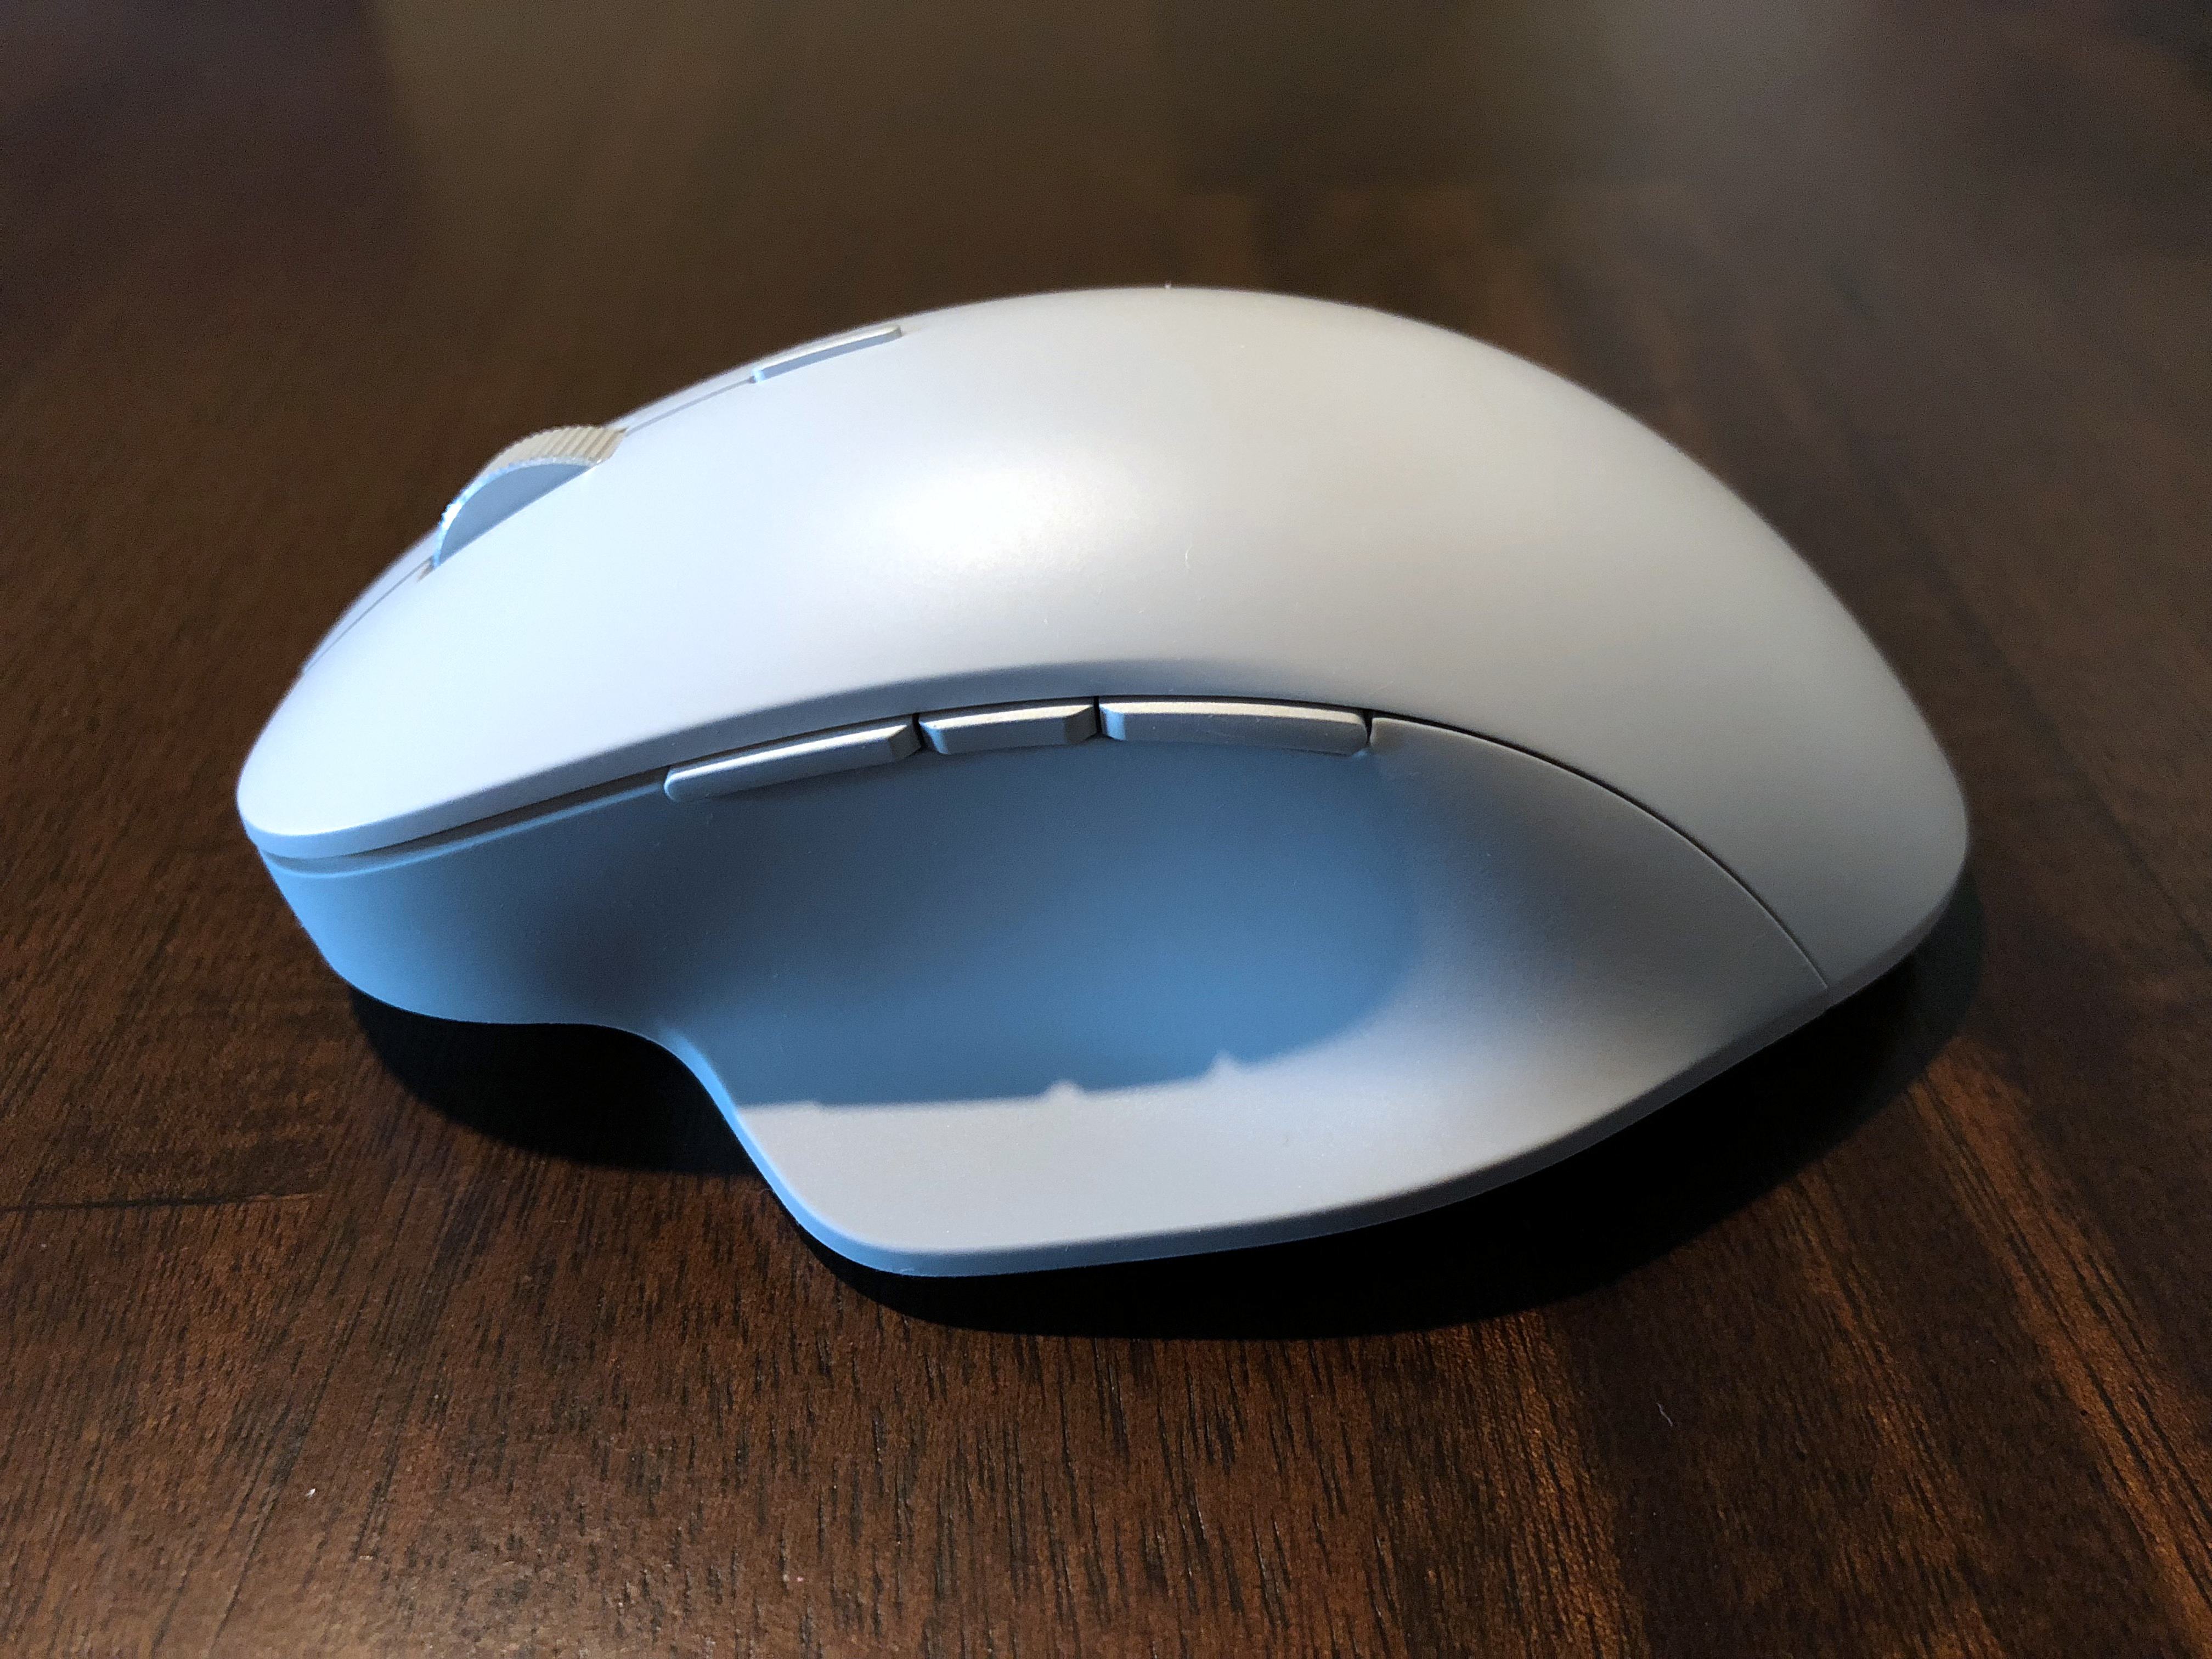 solid red light on microsoft wireless mouse 1000 windows 10